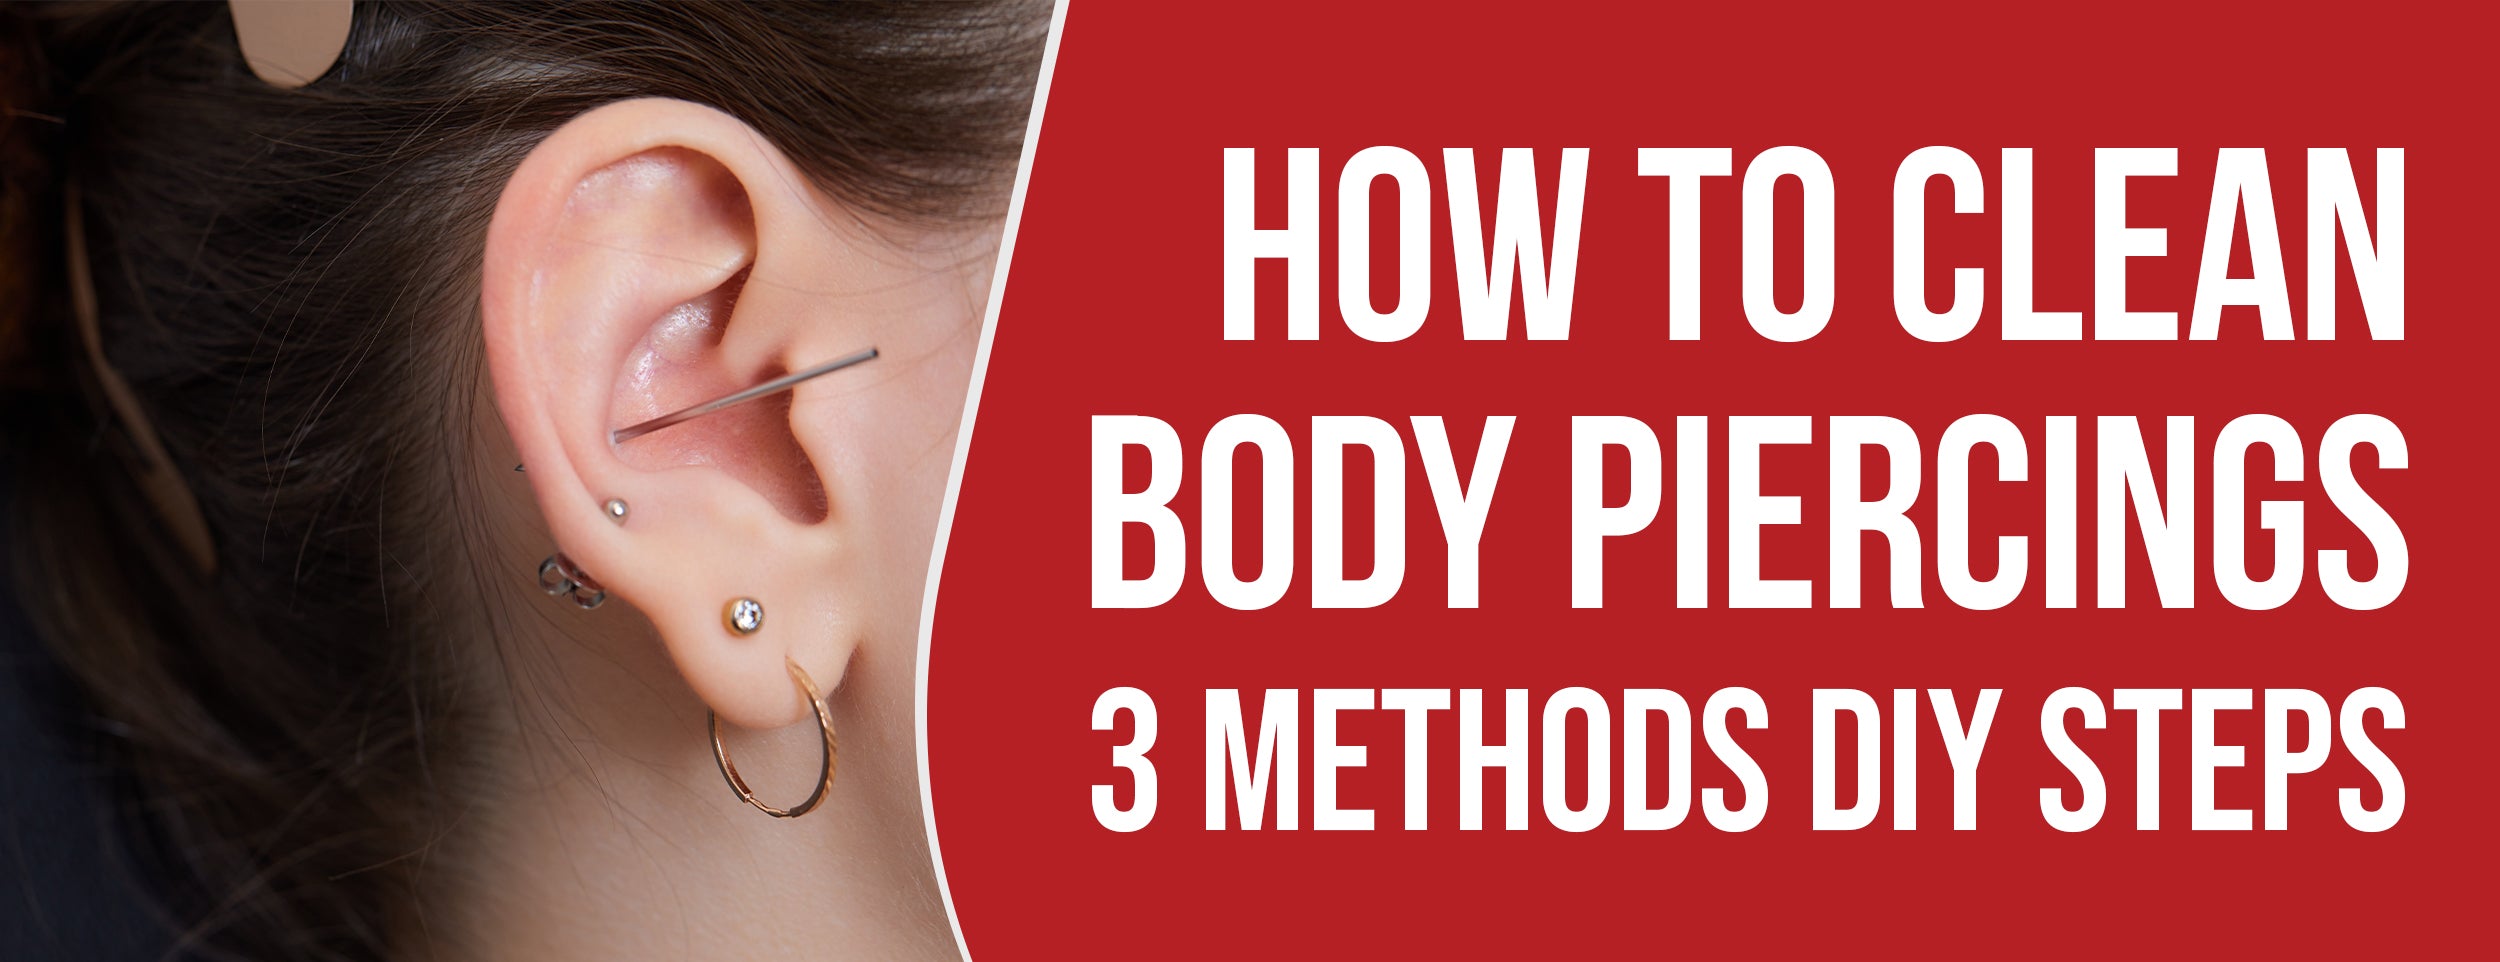 Body Piercing Cleaning: Step-by-Step Procedure & Proper Care [With A Healthy Lifestyle]